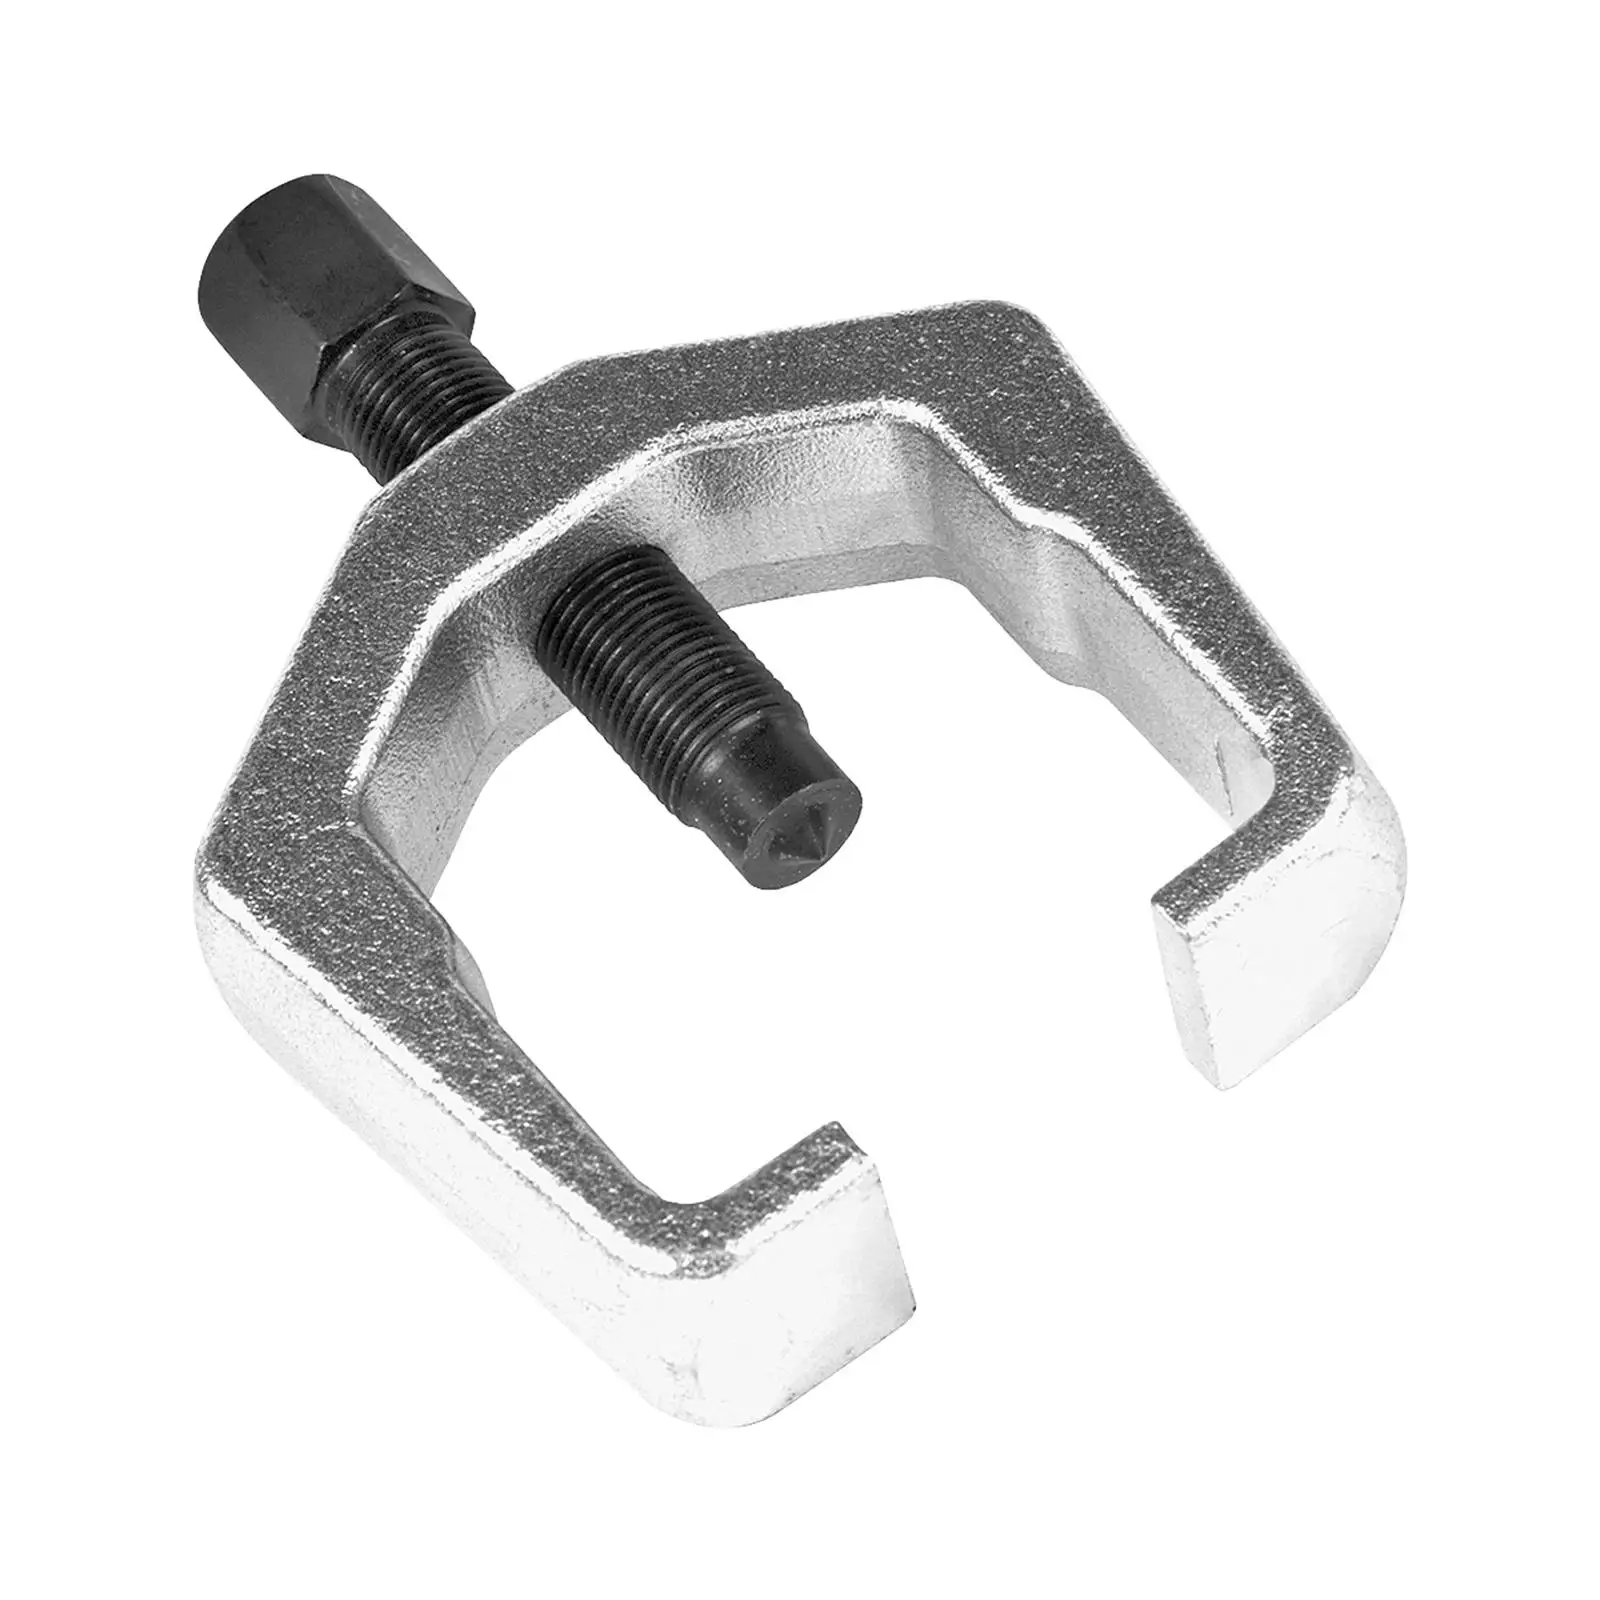 Slack Adjuster Puller Trailers High Performance 2 Jaw Gear Puller Removal Tool for Gears Sturdy Maintenance Tool Remover Tool